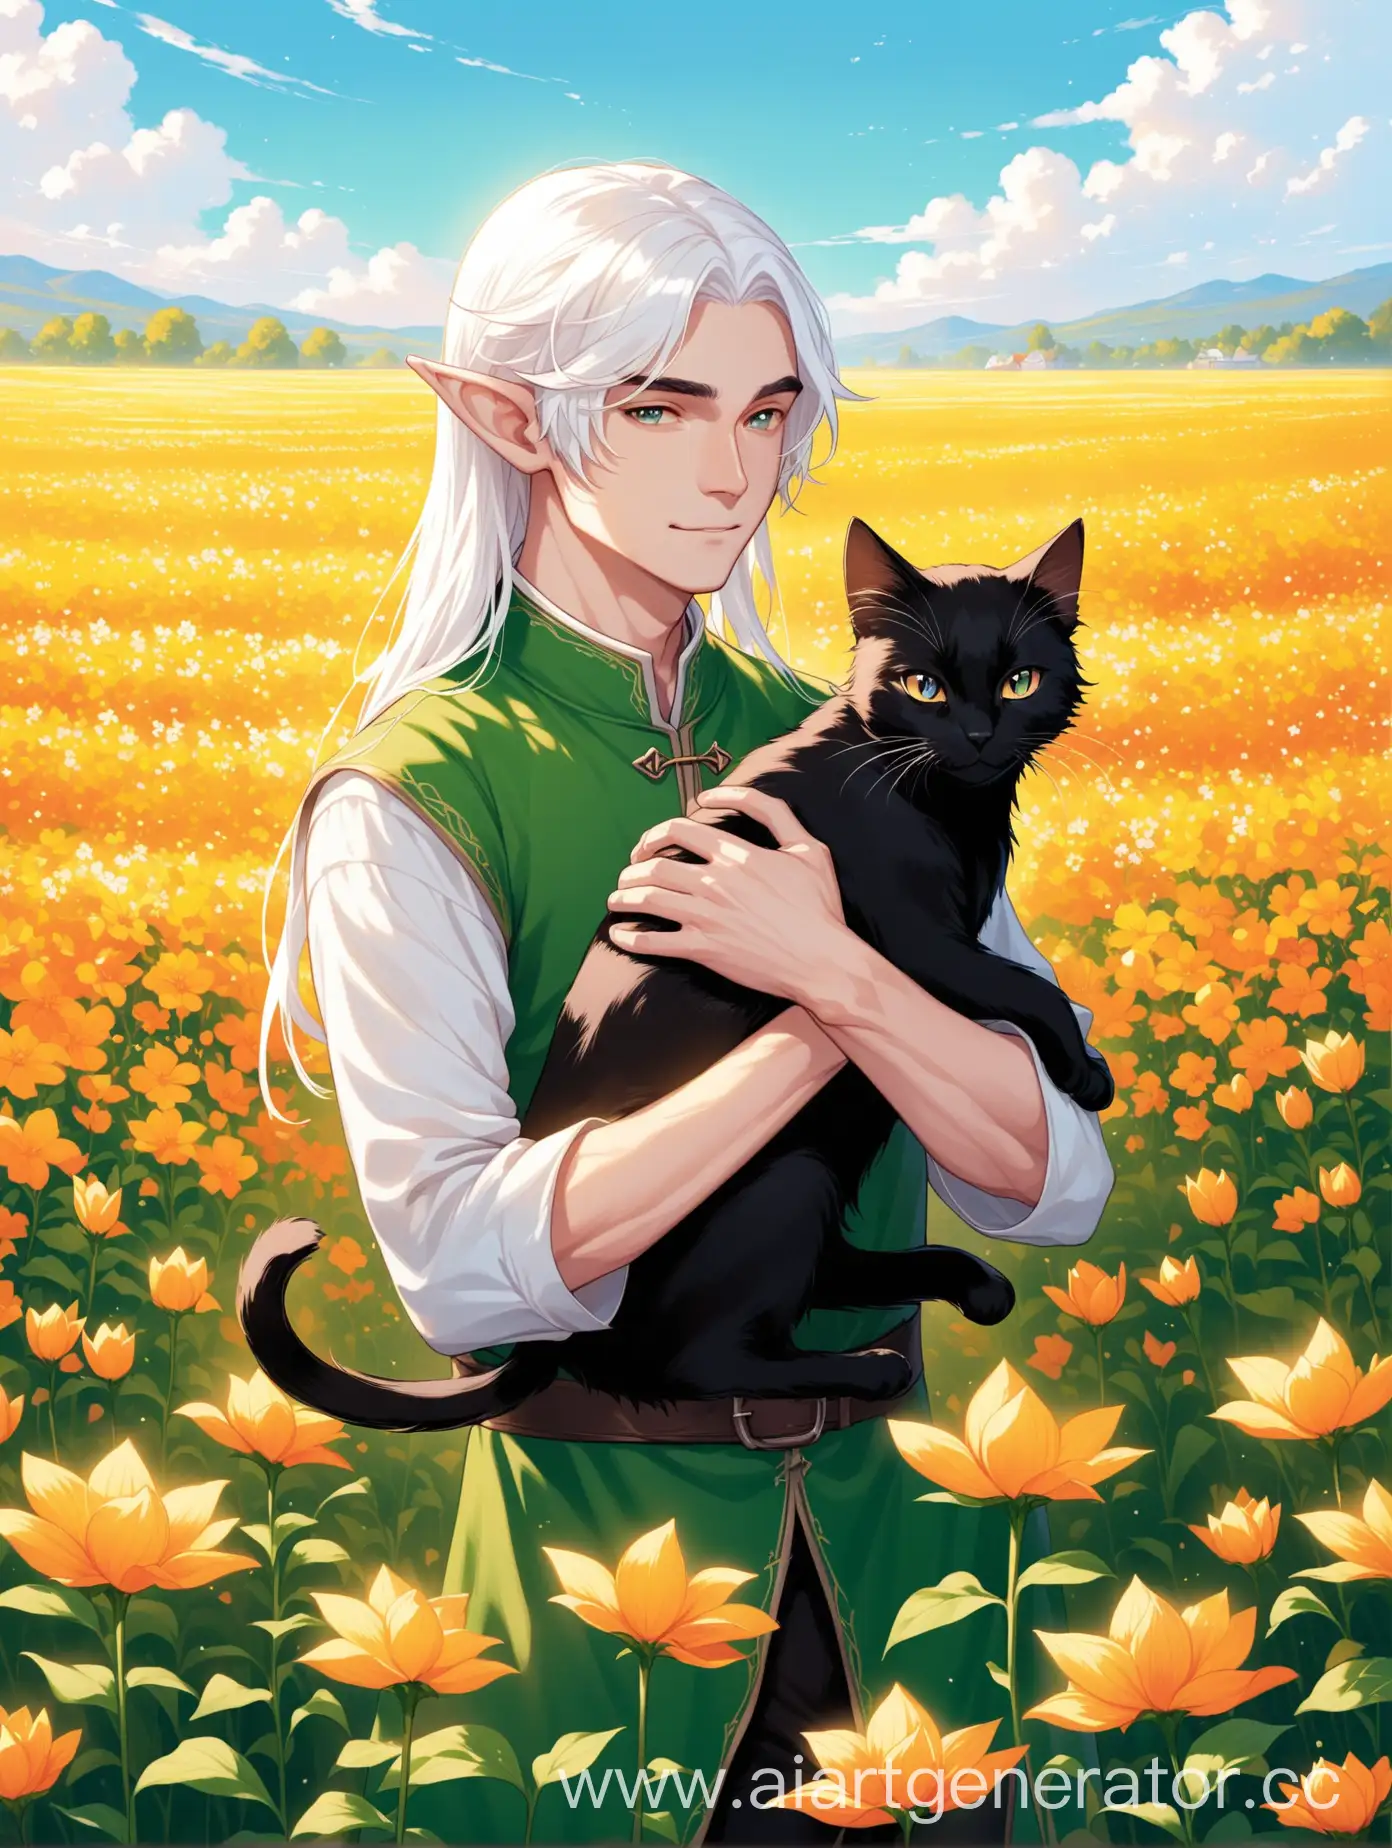 Elf-with-White-Hair-Holding-Black-Cat-in-Flowery-Field